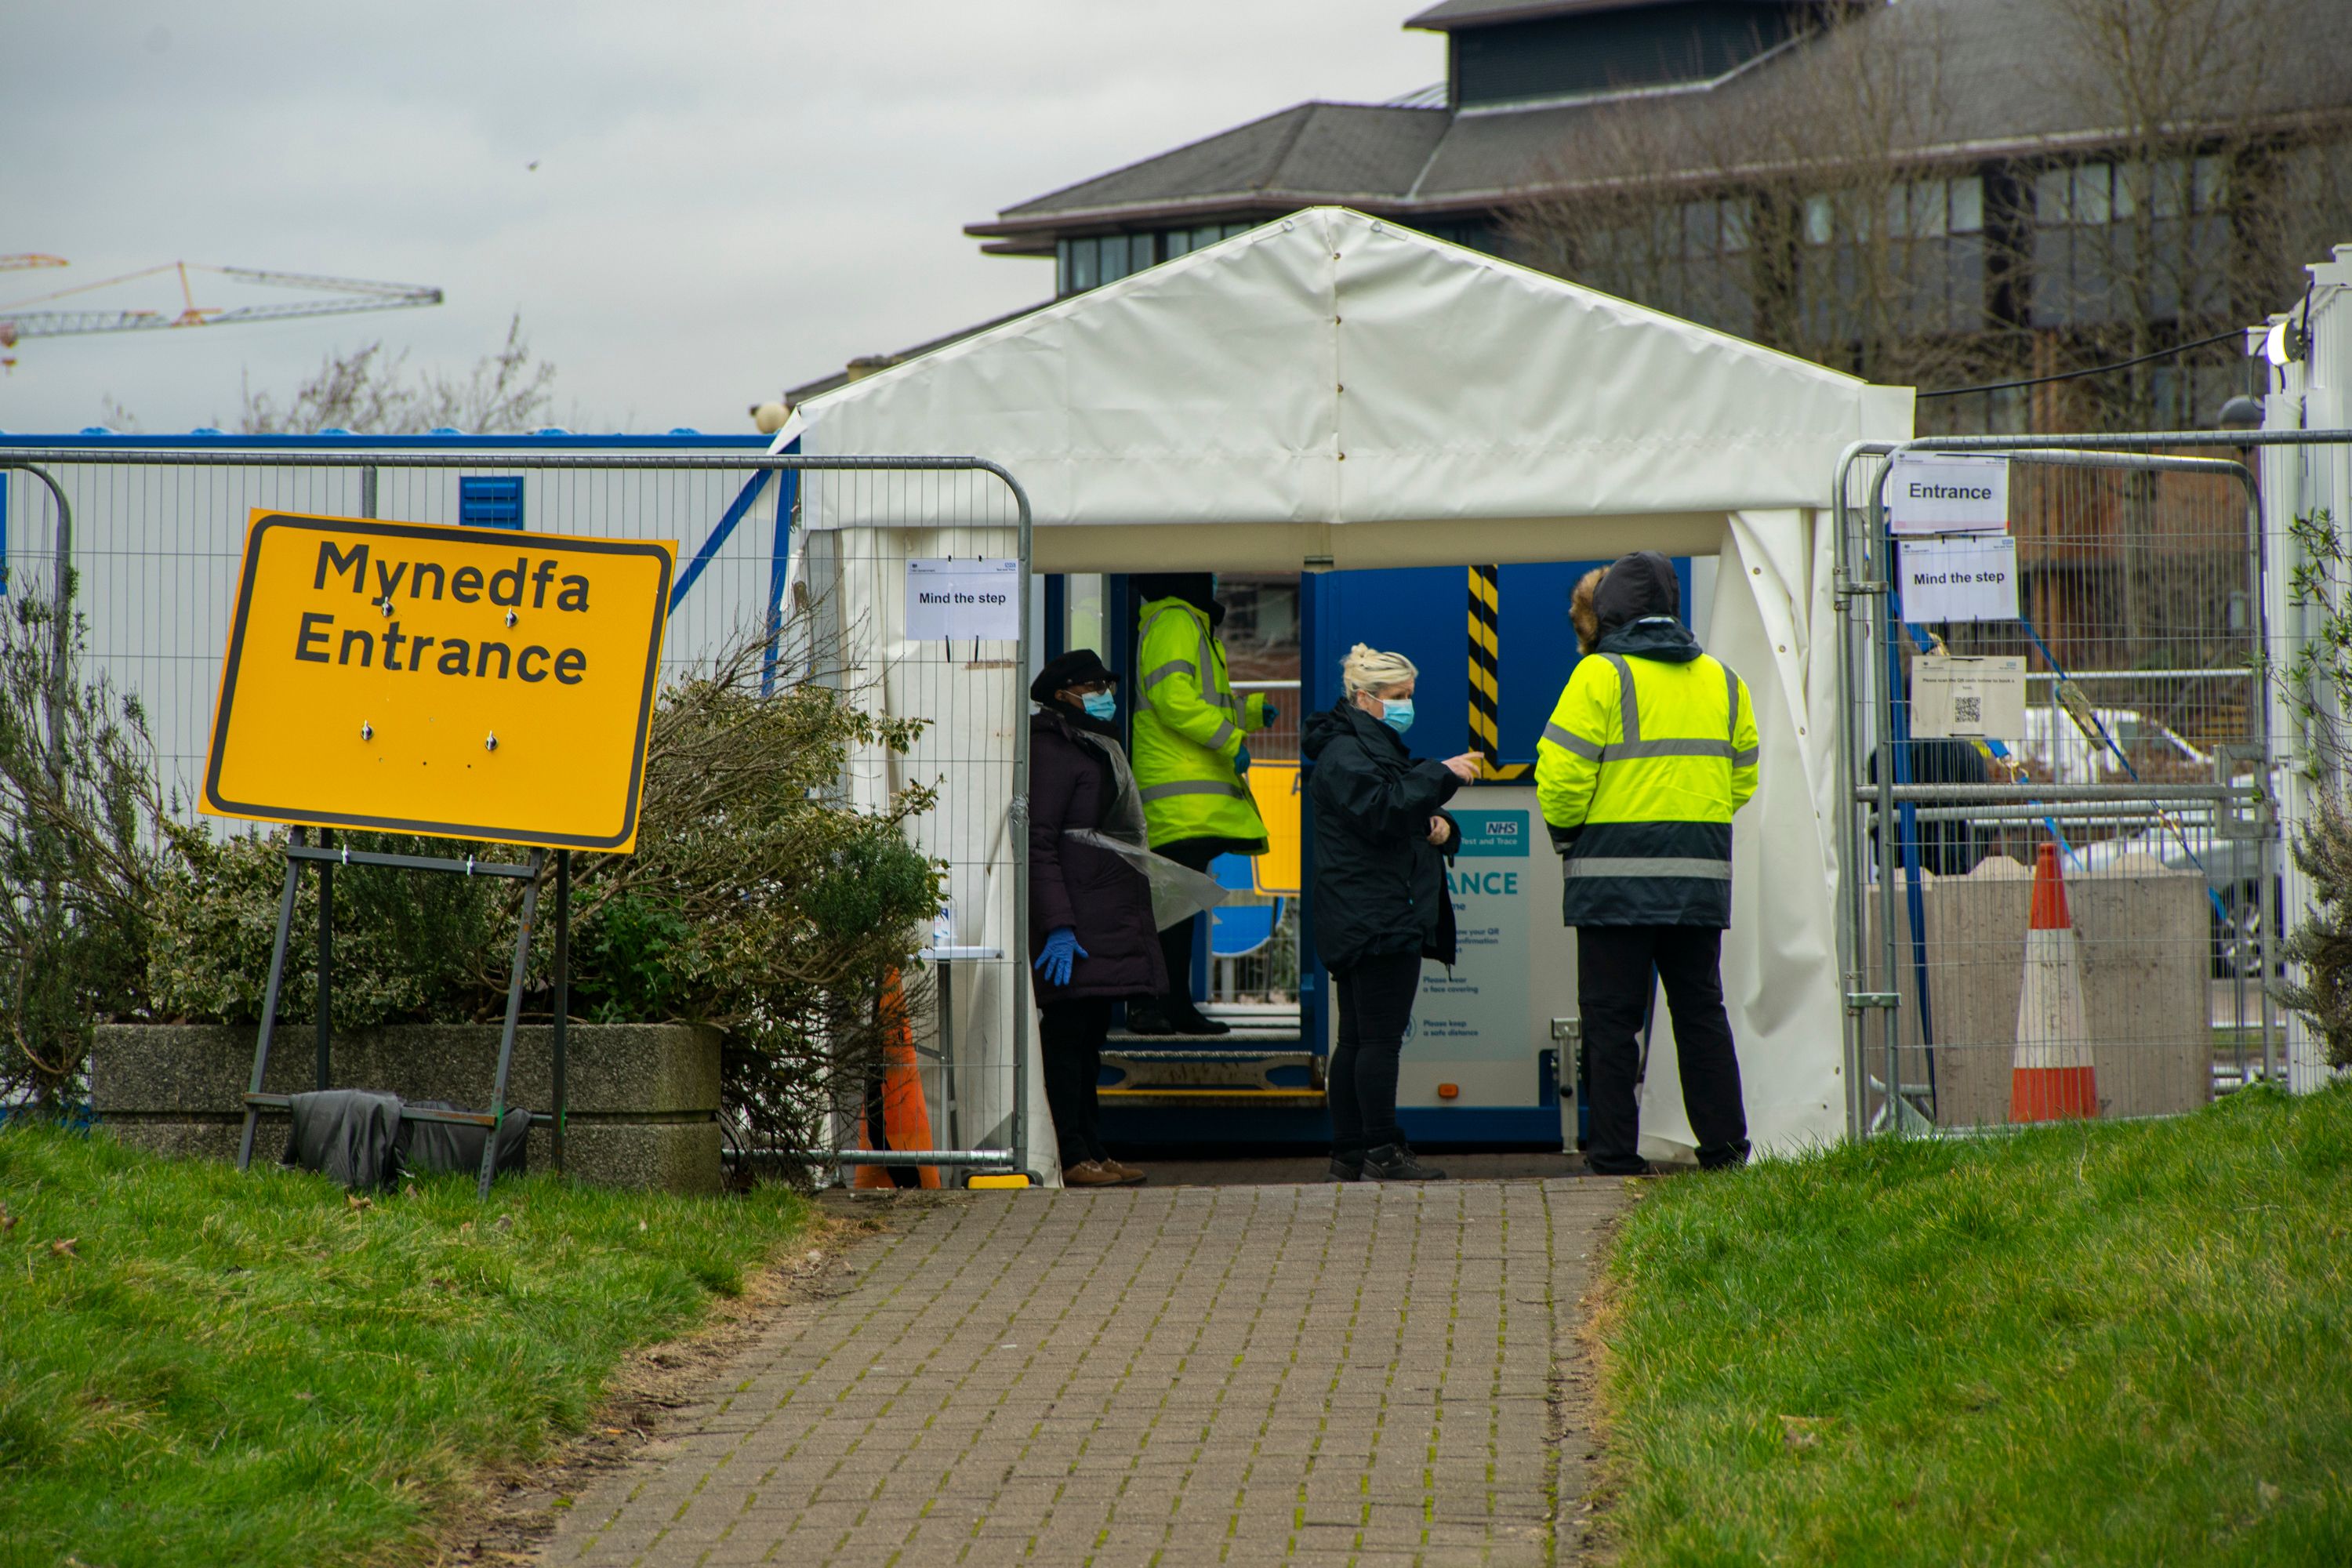 A COVID-19 testing center, which was set up in the car park of City Hall in Cardiff, Wales. Image by GarethWilley / Shutterstock. United Kingdom, 2021.